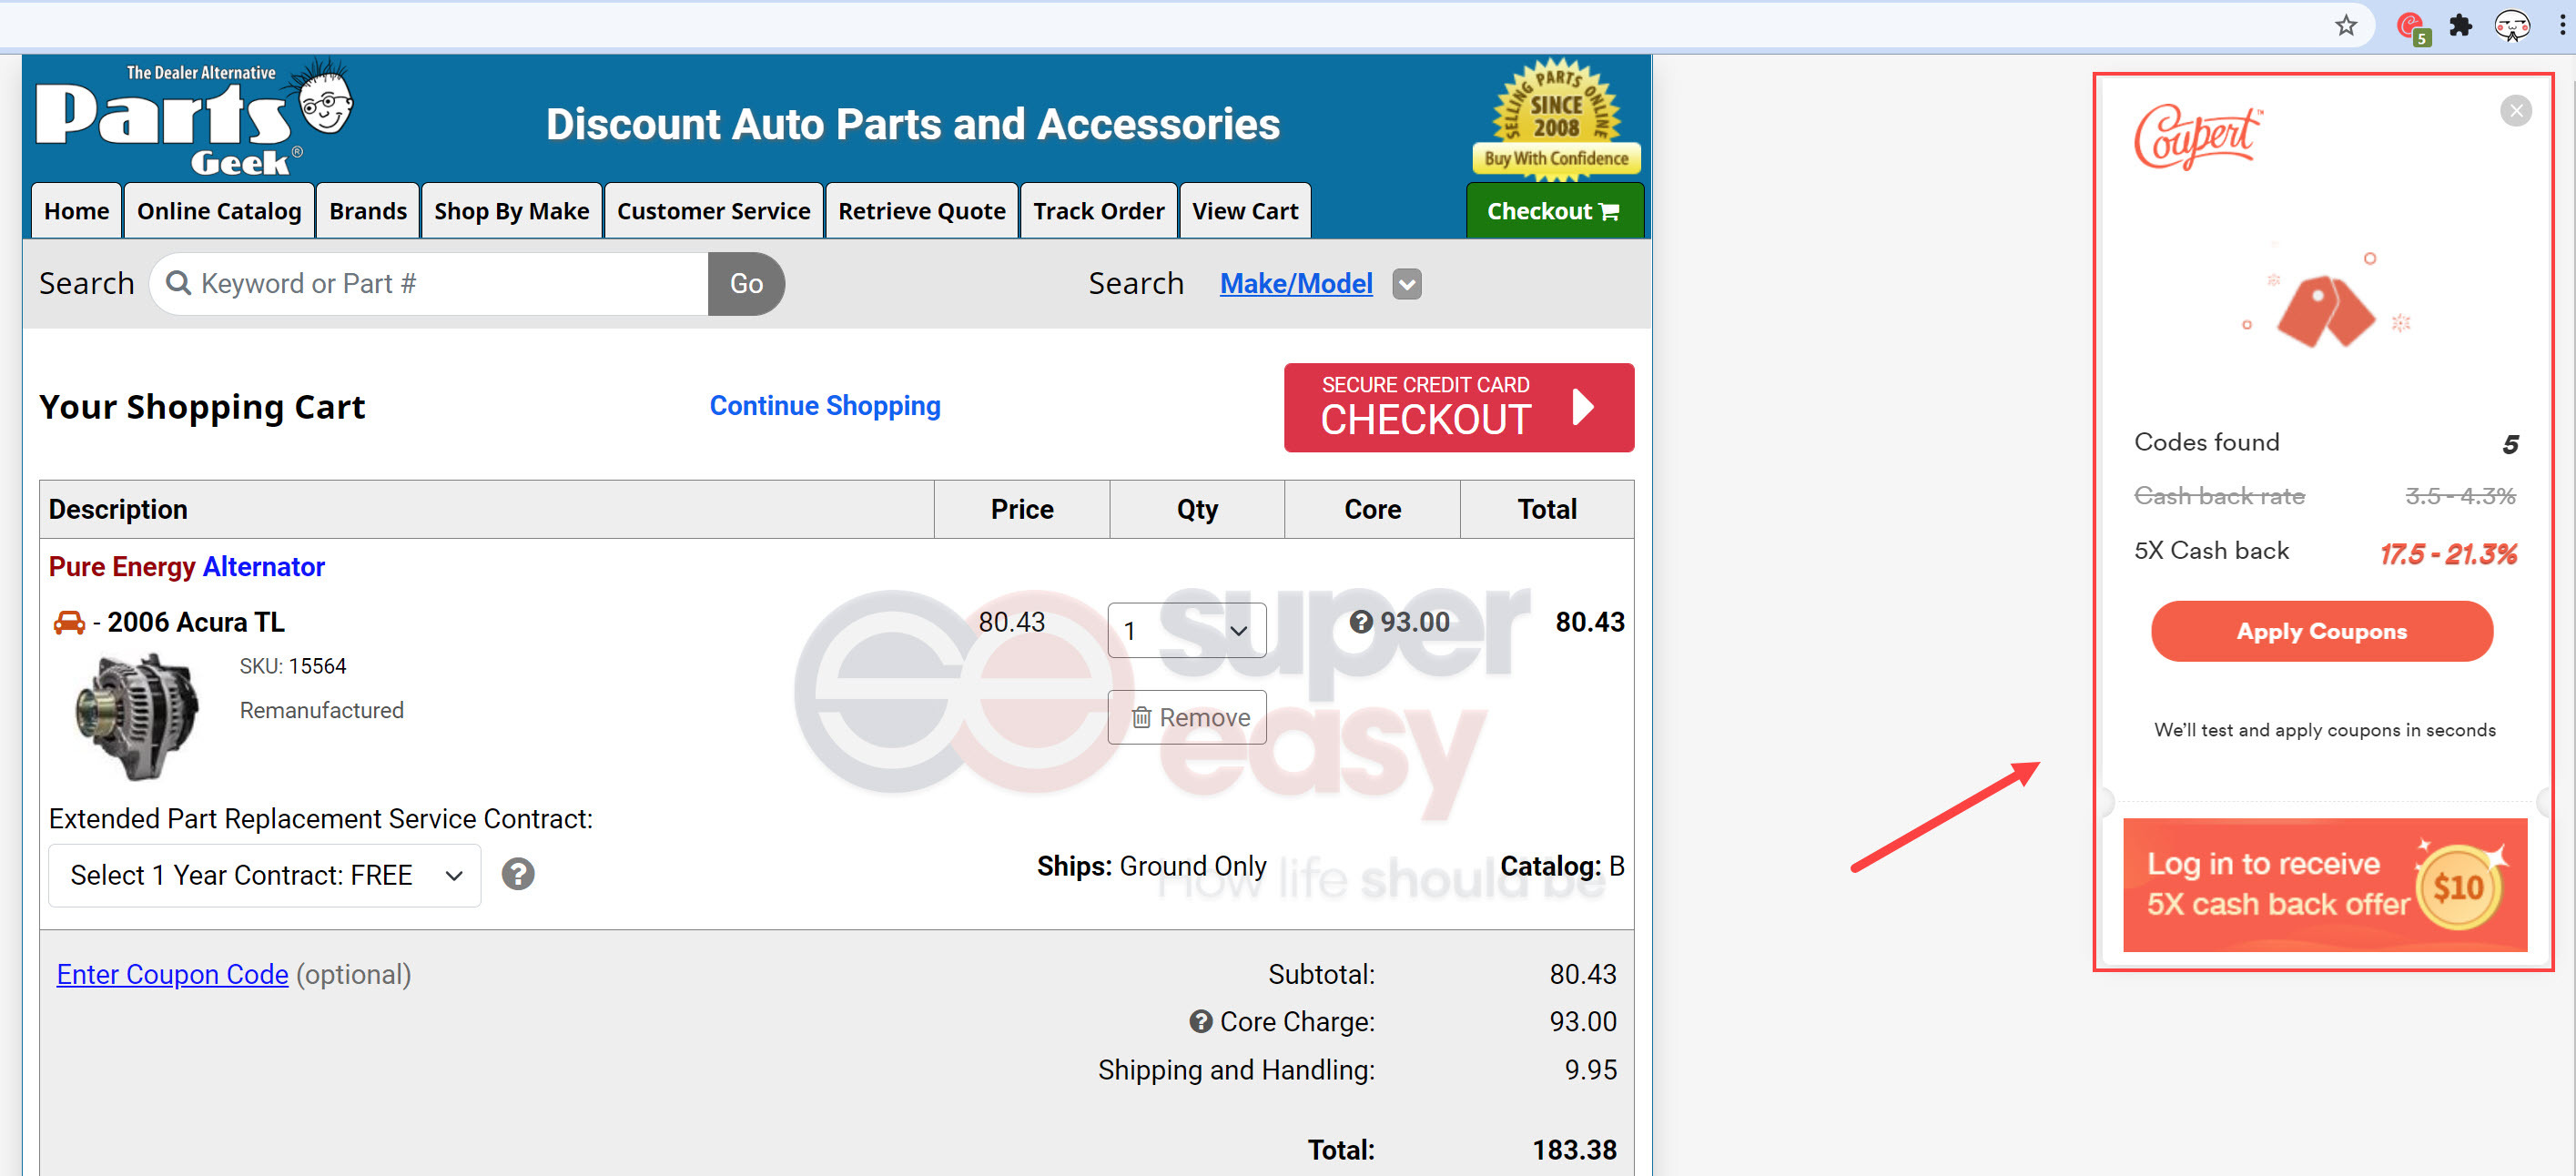 Parts Geek coupons coupert checkout